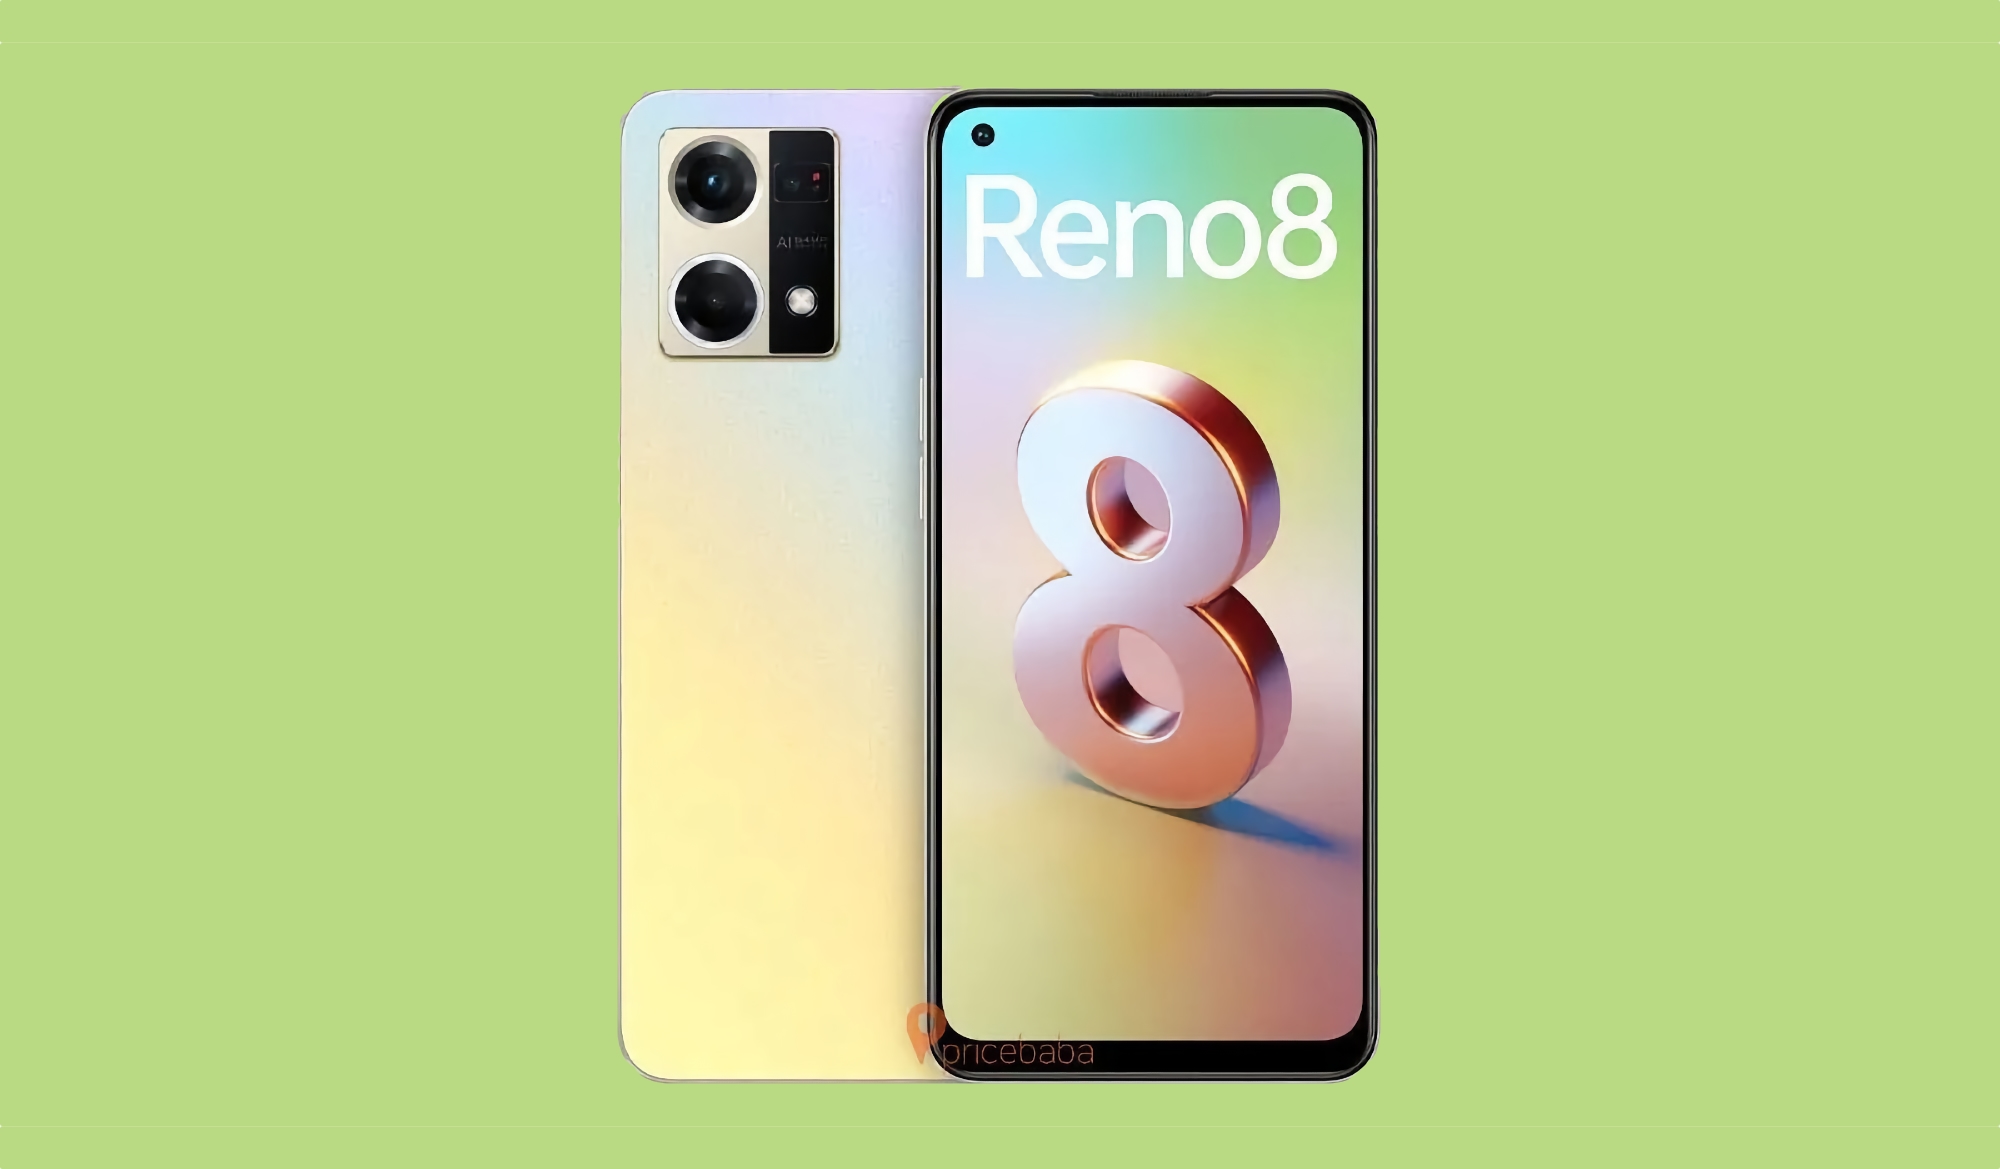 OPPO Reno 8 4G with Snapdragon 680 chip, 90Hz screen and 33W charging will be introduced on August 15